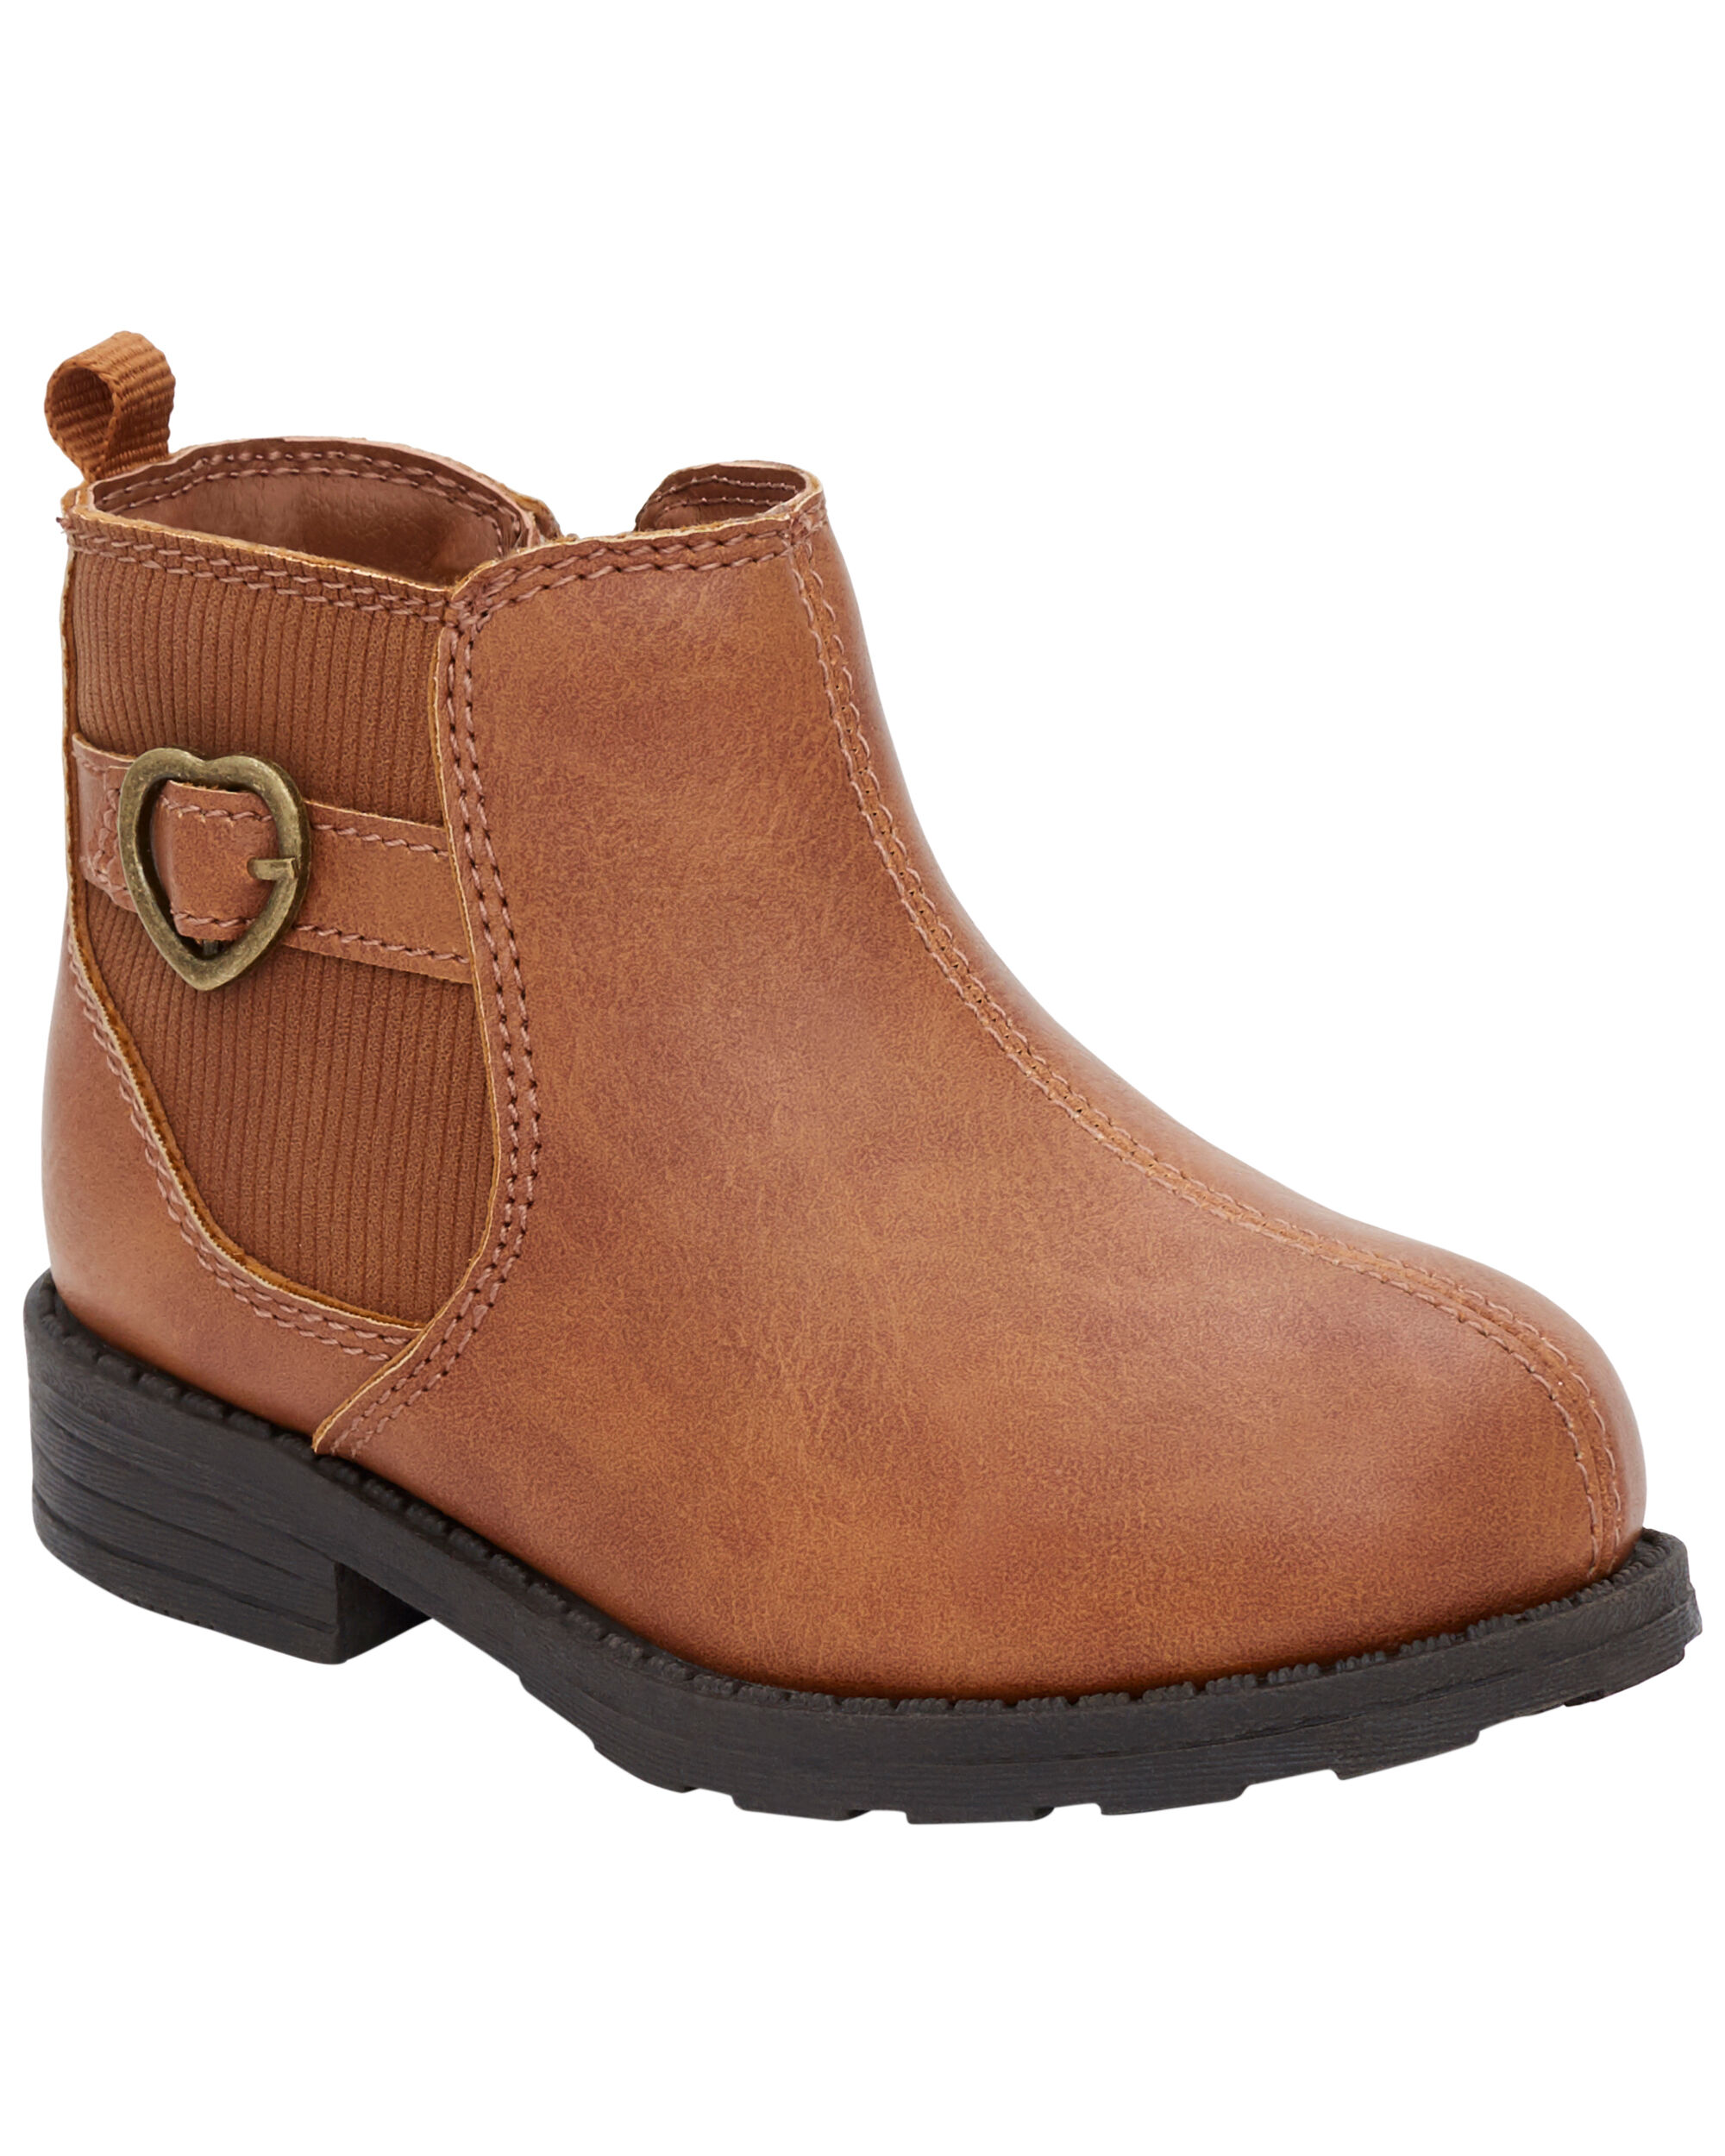 Toddler Carters Chelsea Boots